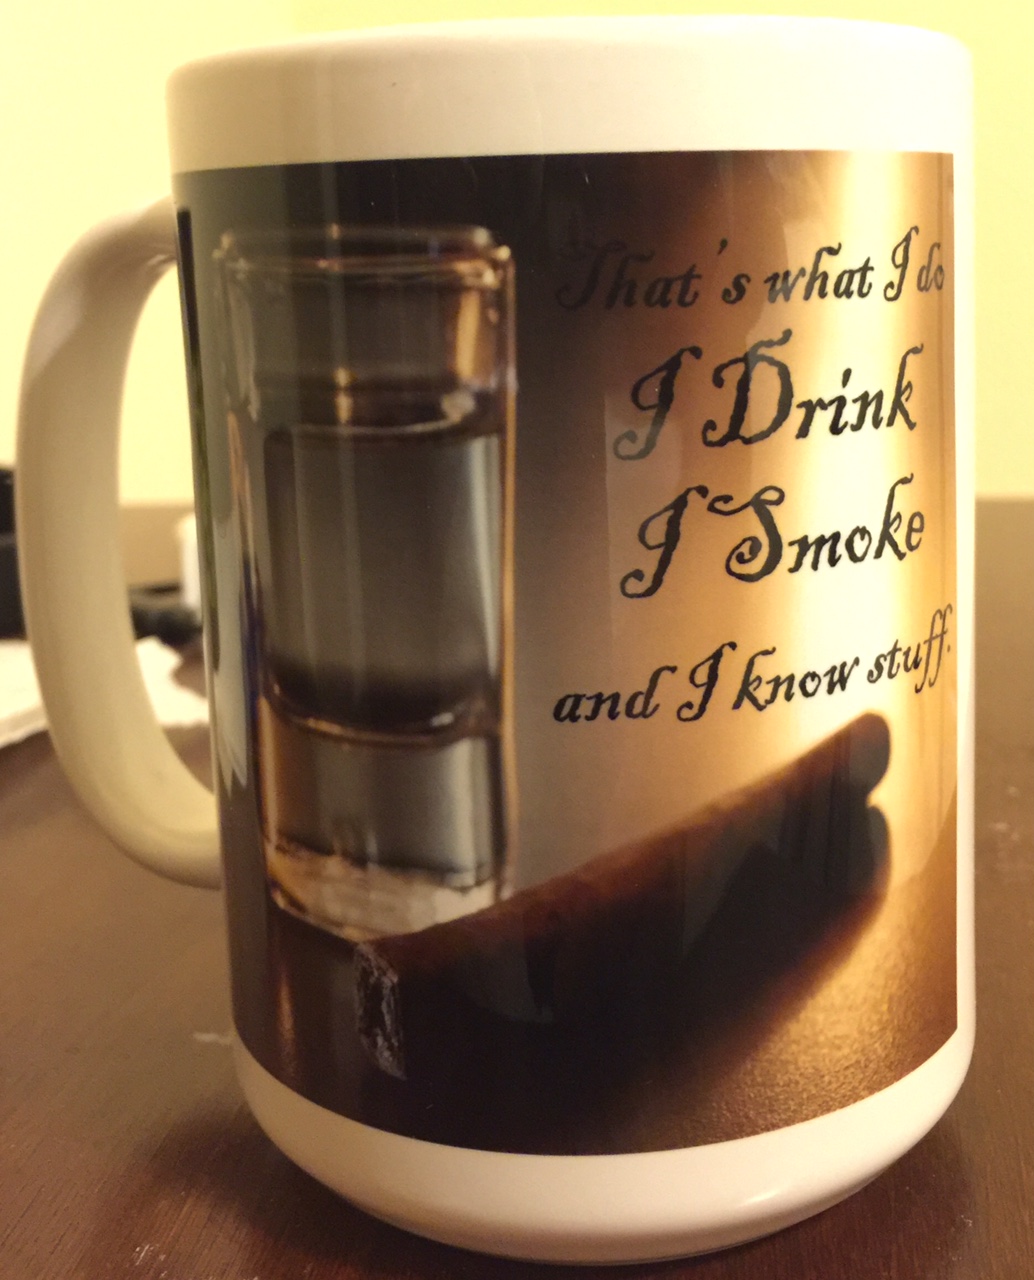 I Drink, I Smoke and i know Stuff made with sublimation printing